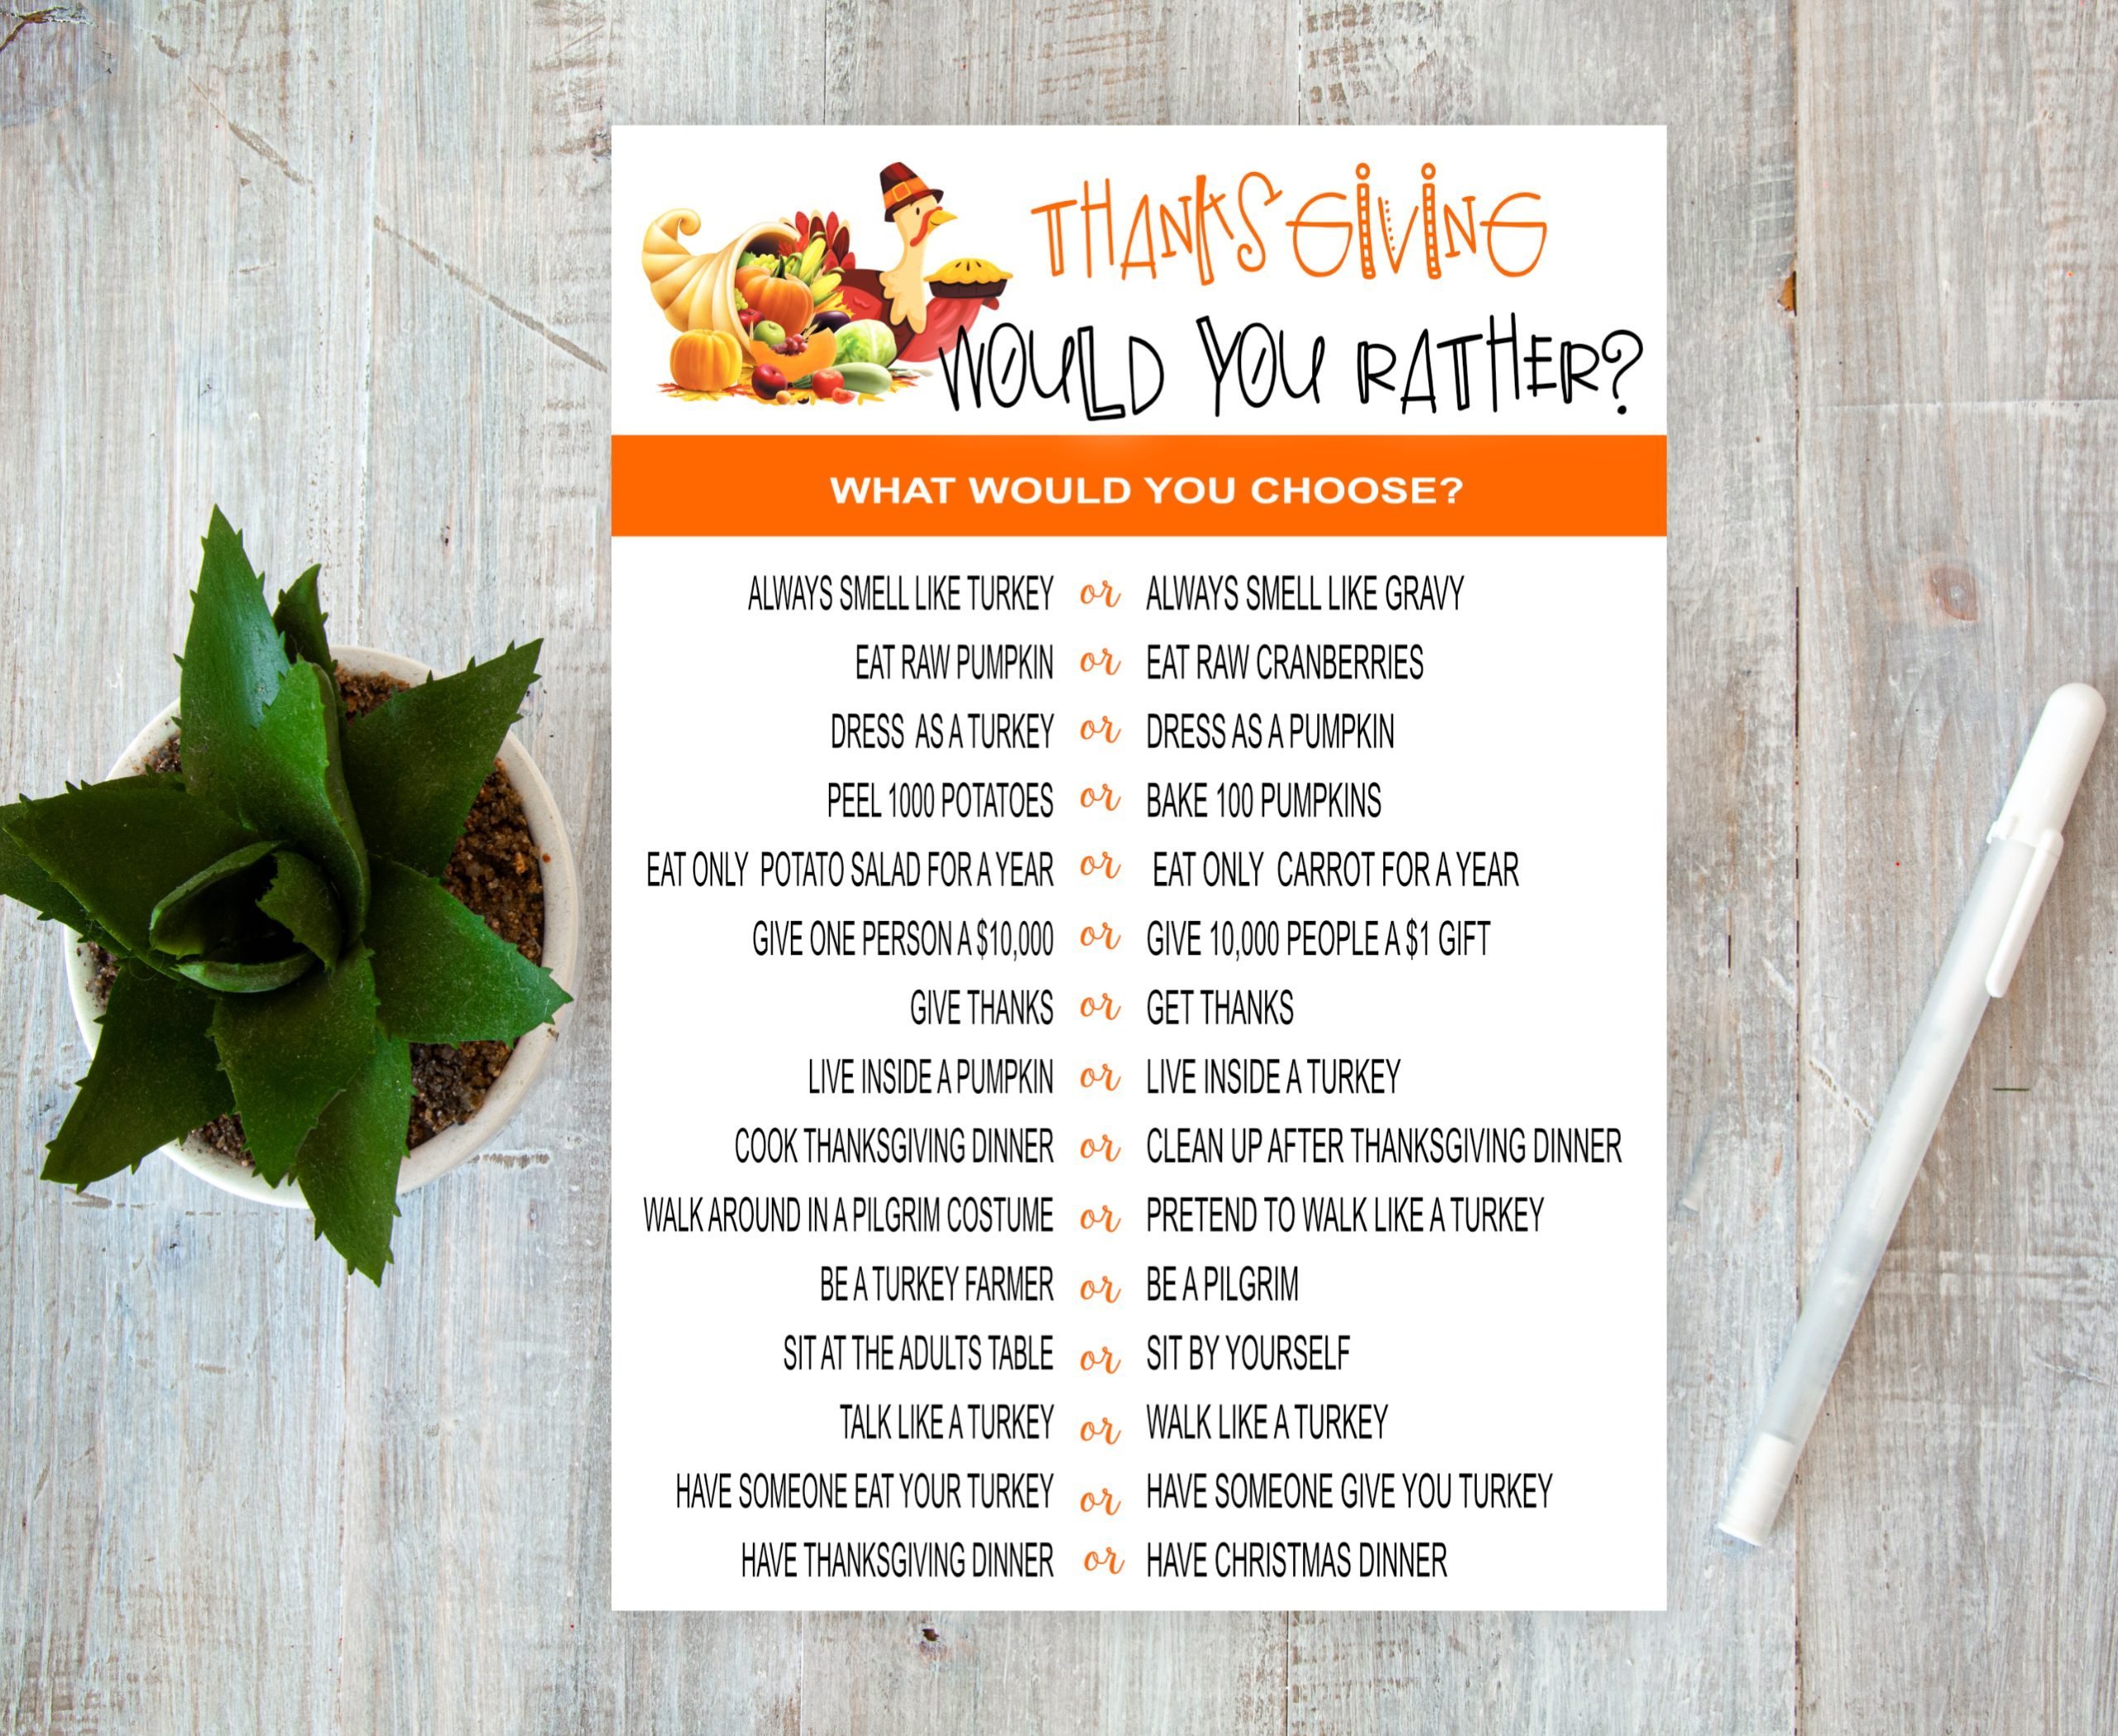 70 Fun Thanksgiving Would You Rather Questions (Free Printable)